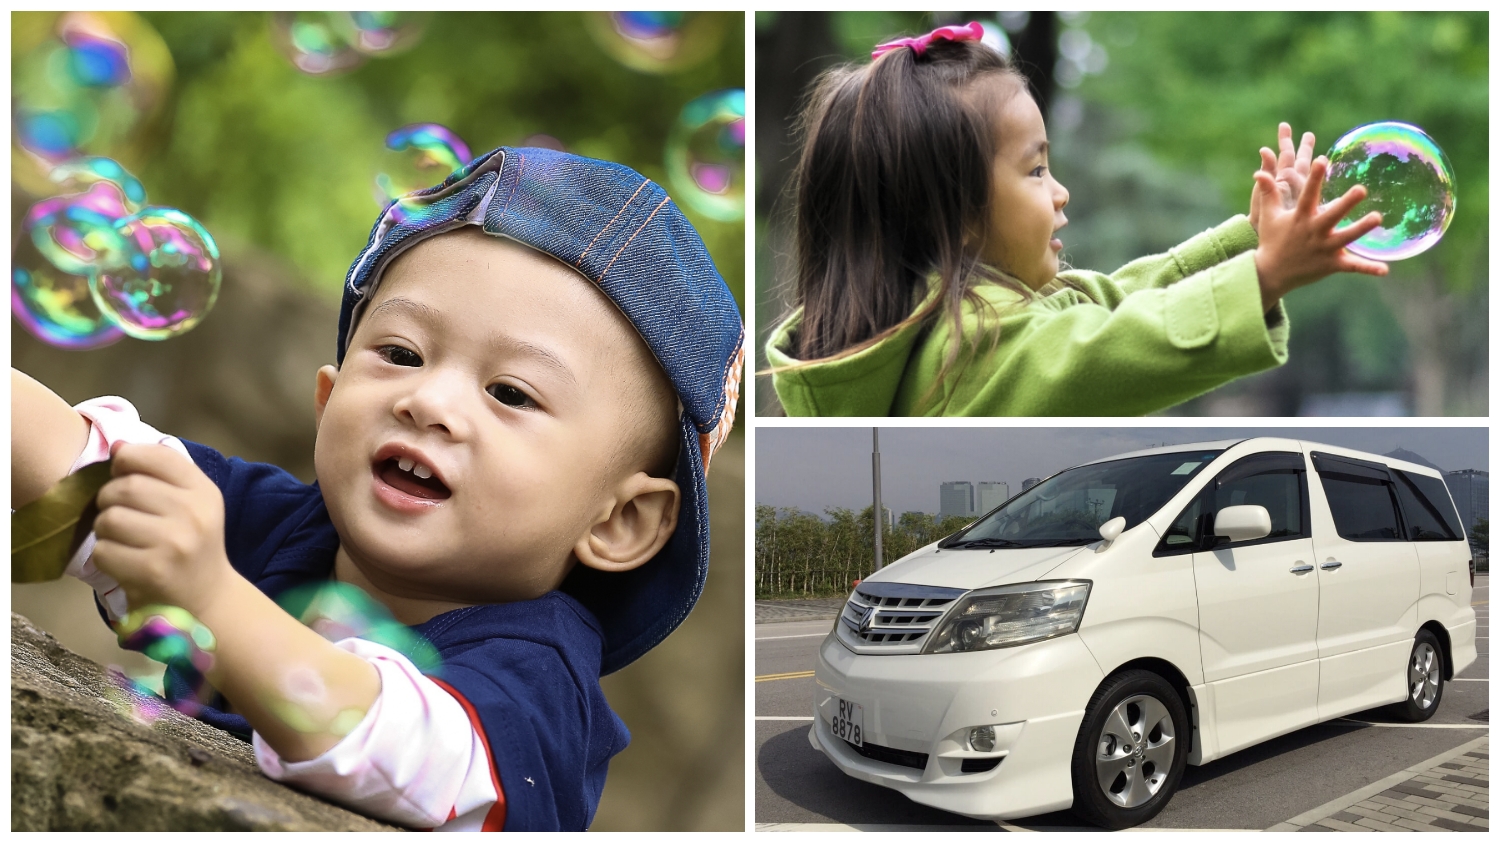 Hong Kong private car tour is the safe mini travel bubble for Singapore travelers' kids